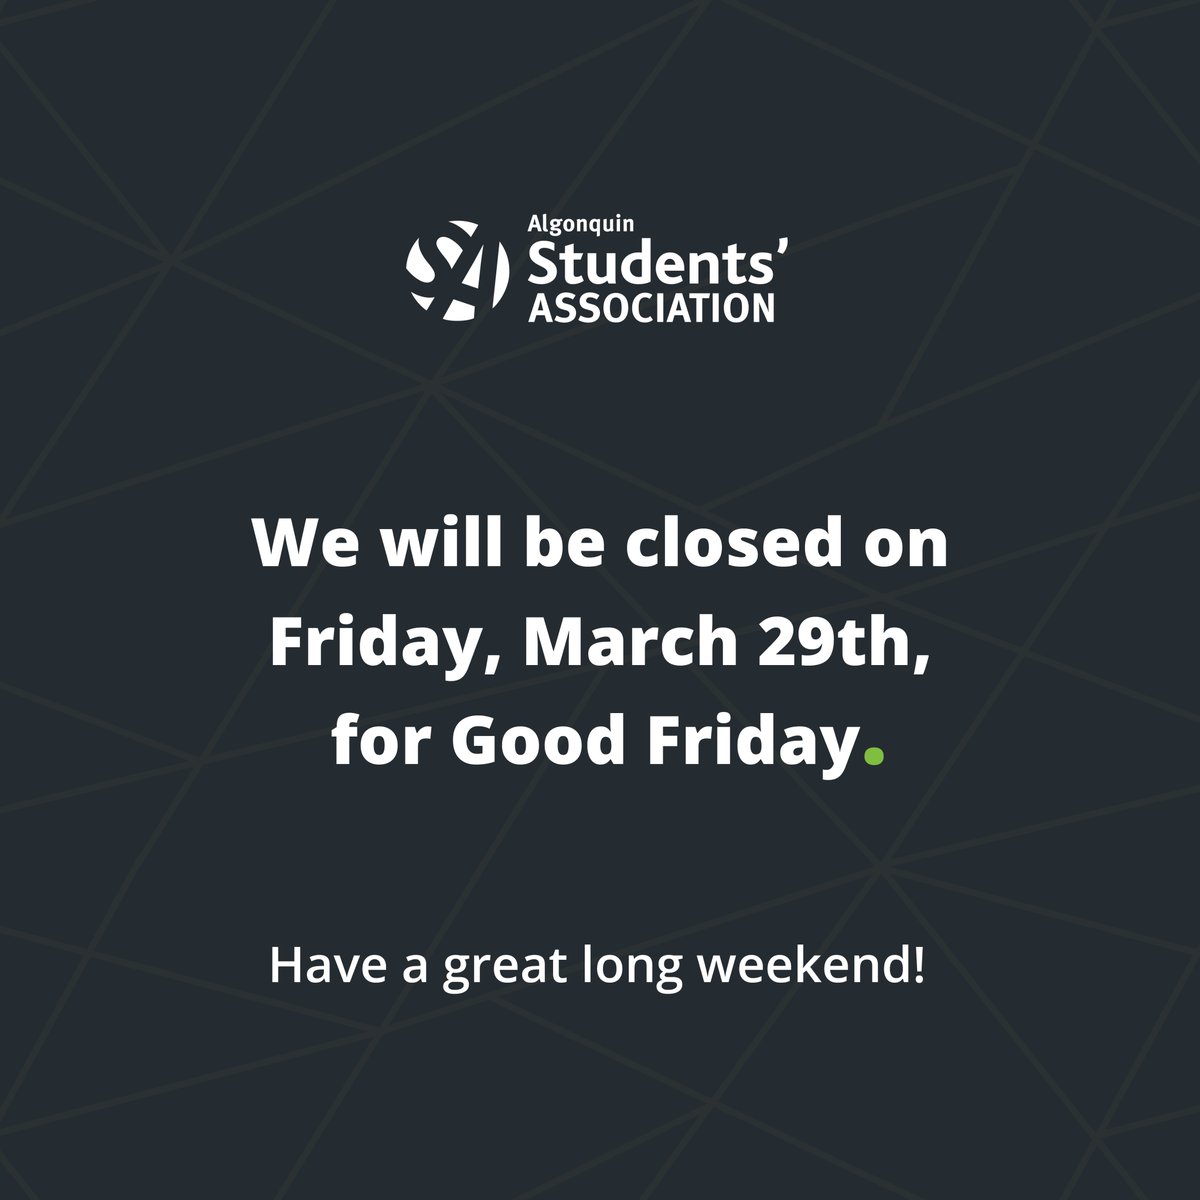 Hey Algonquin SA, We'll be closed this Friday, March 29, for Good Friday. Enjoy your long weekend! #AlgonquinSA